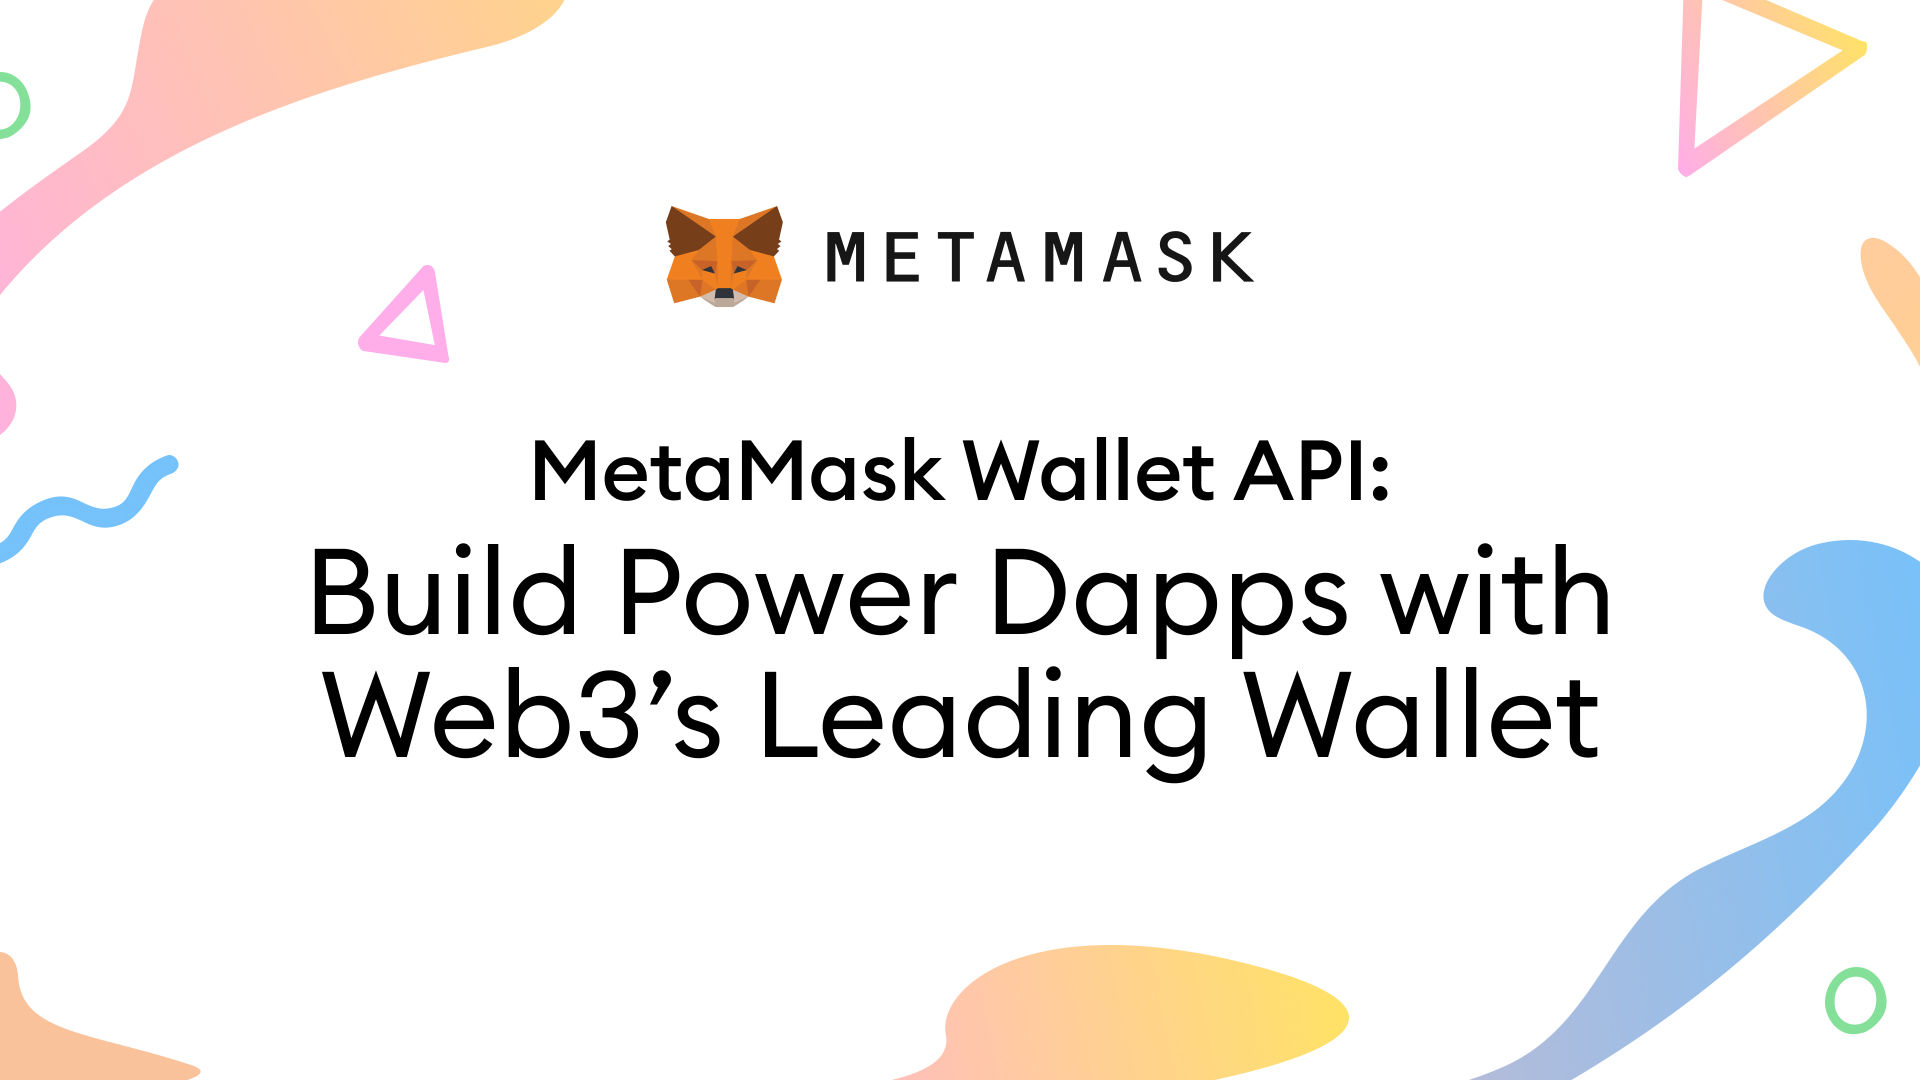 Introducing the MetaMask Wallet API. Learn the key benefits and how to integrate it into your workflow and join the MetaMask Developer community.